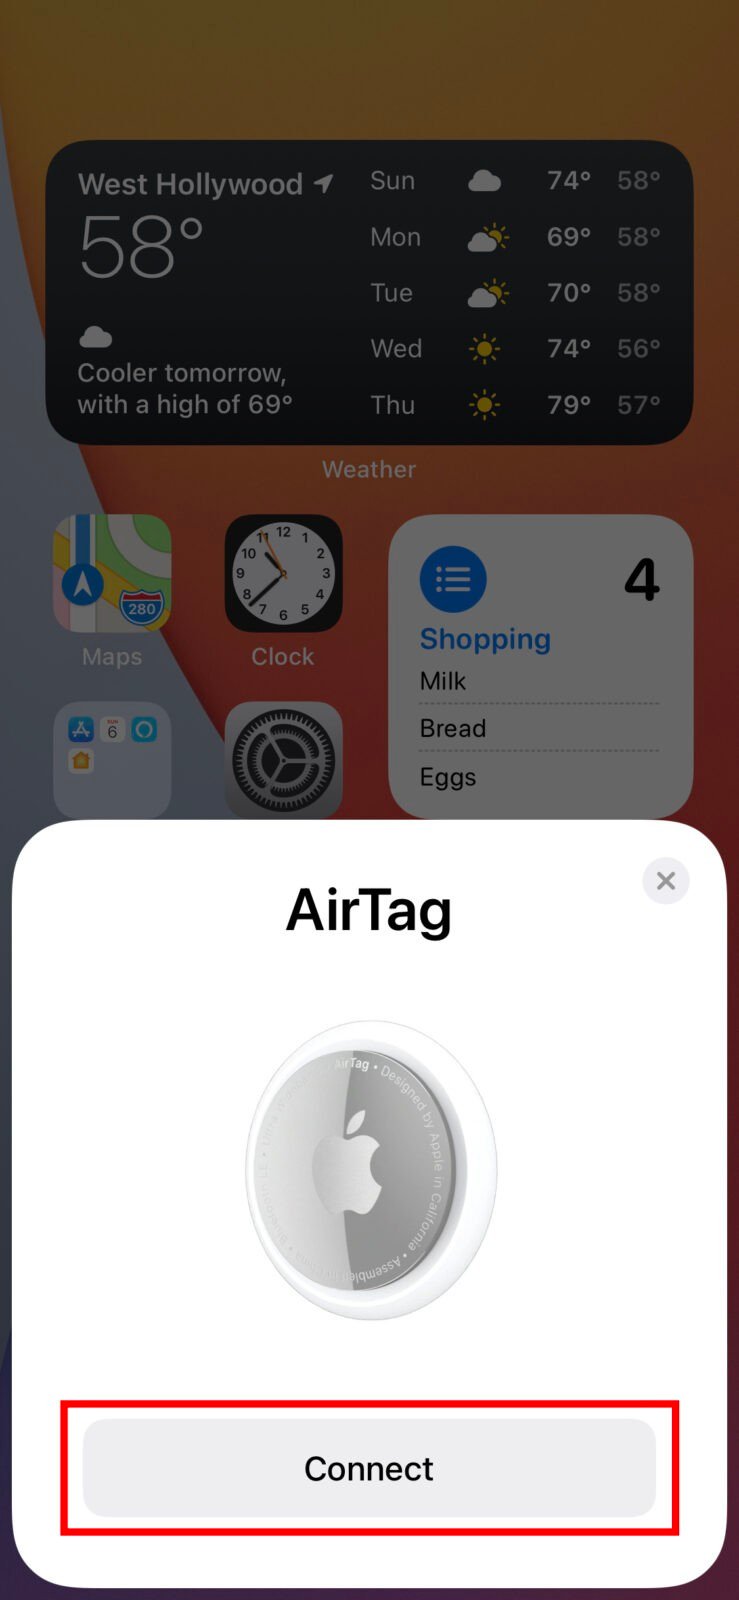 How to Set Up an AirTag